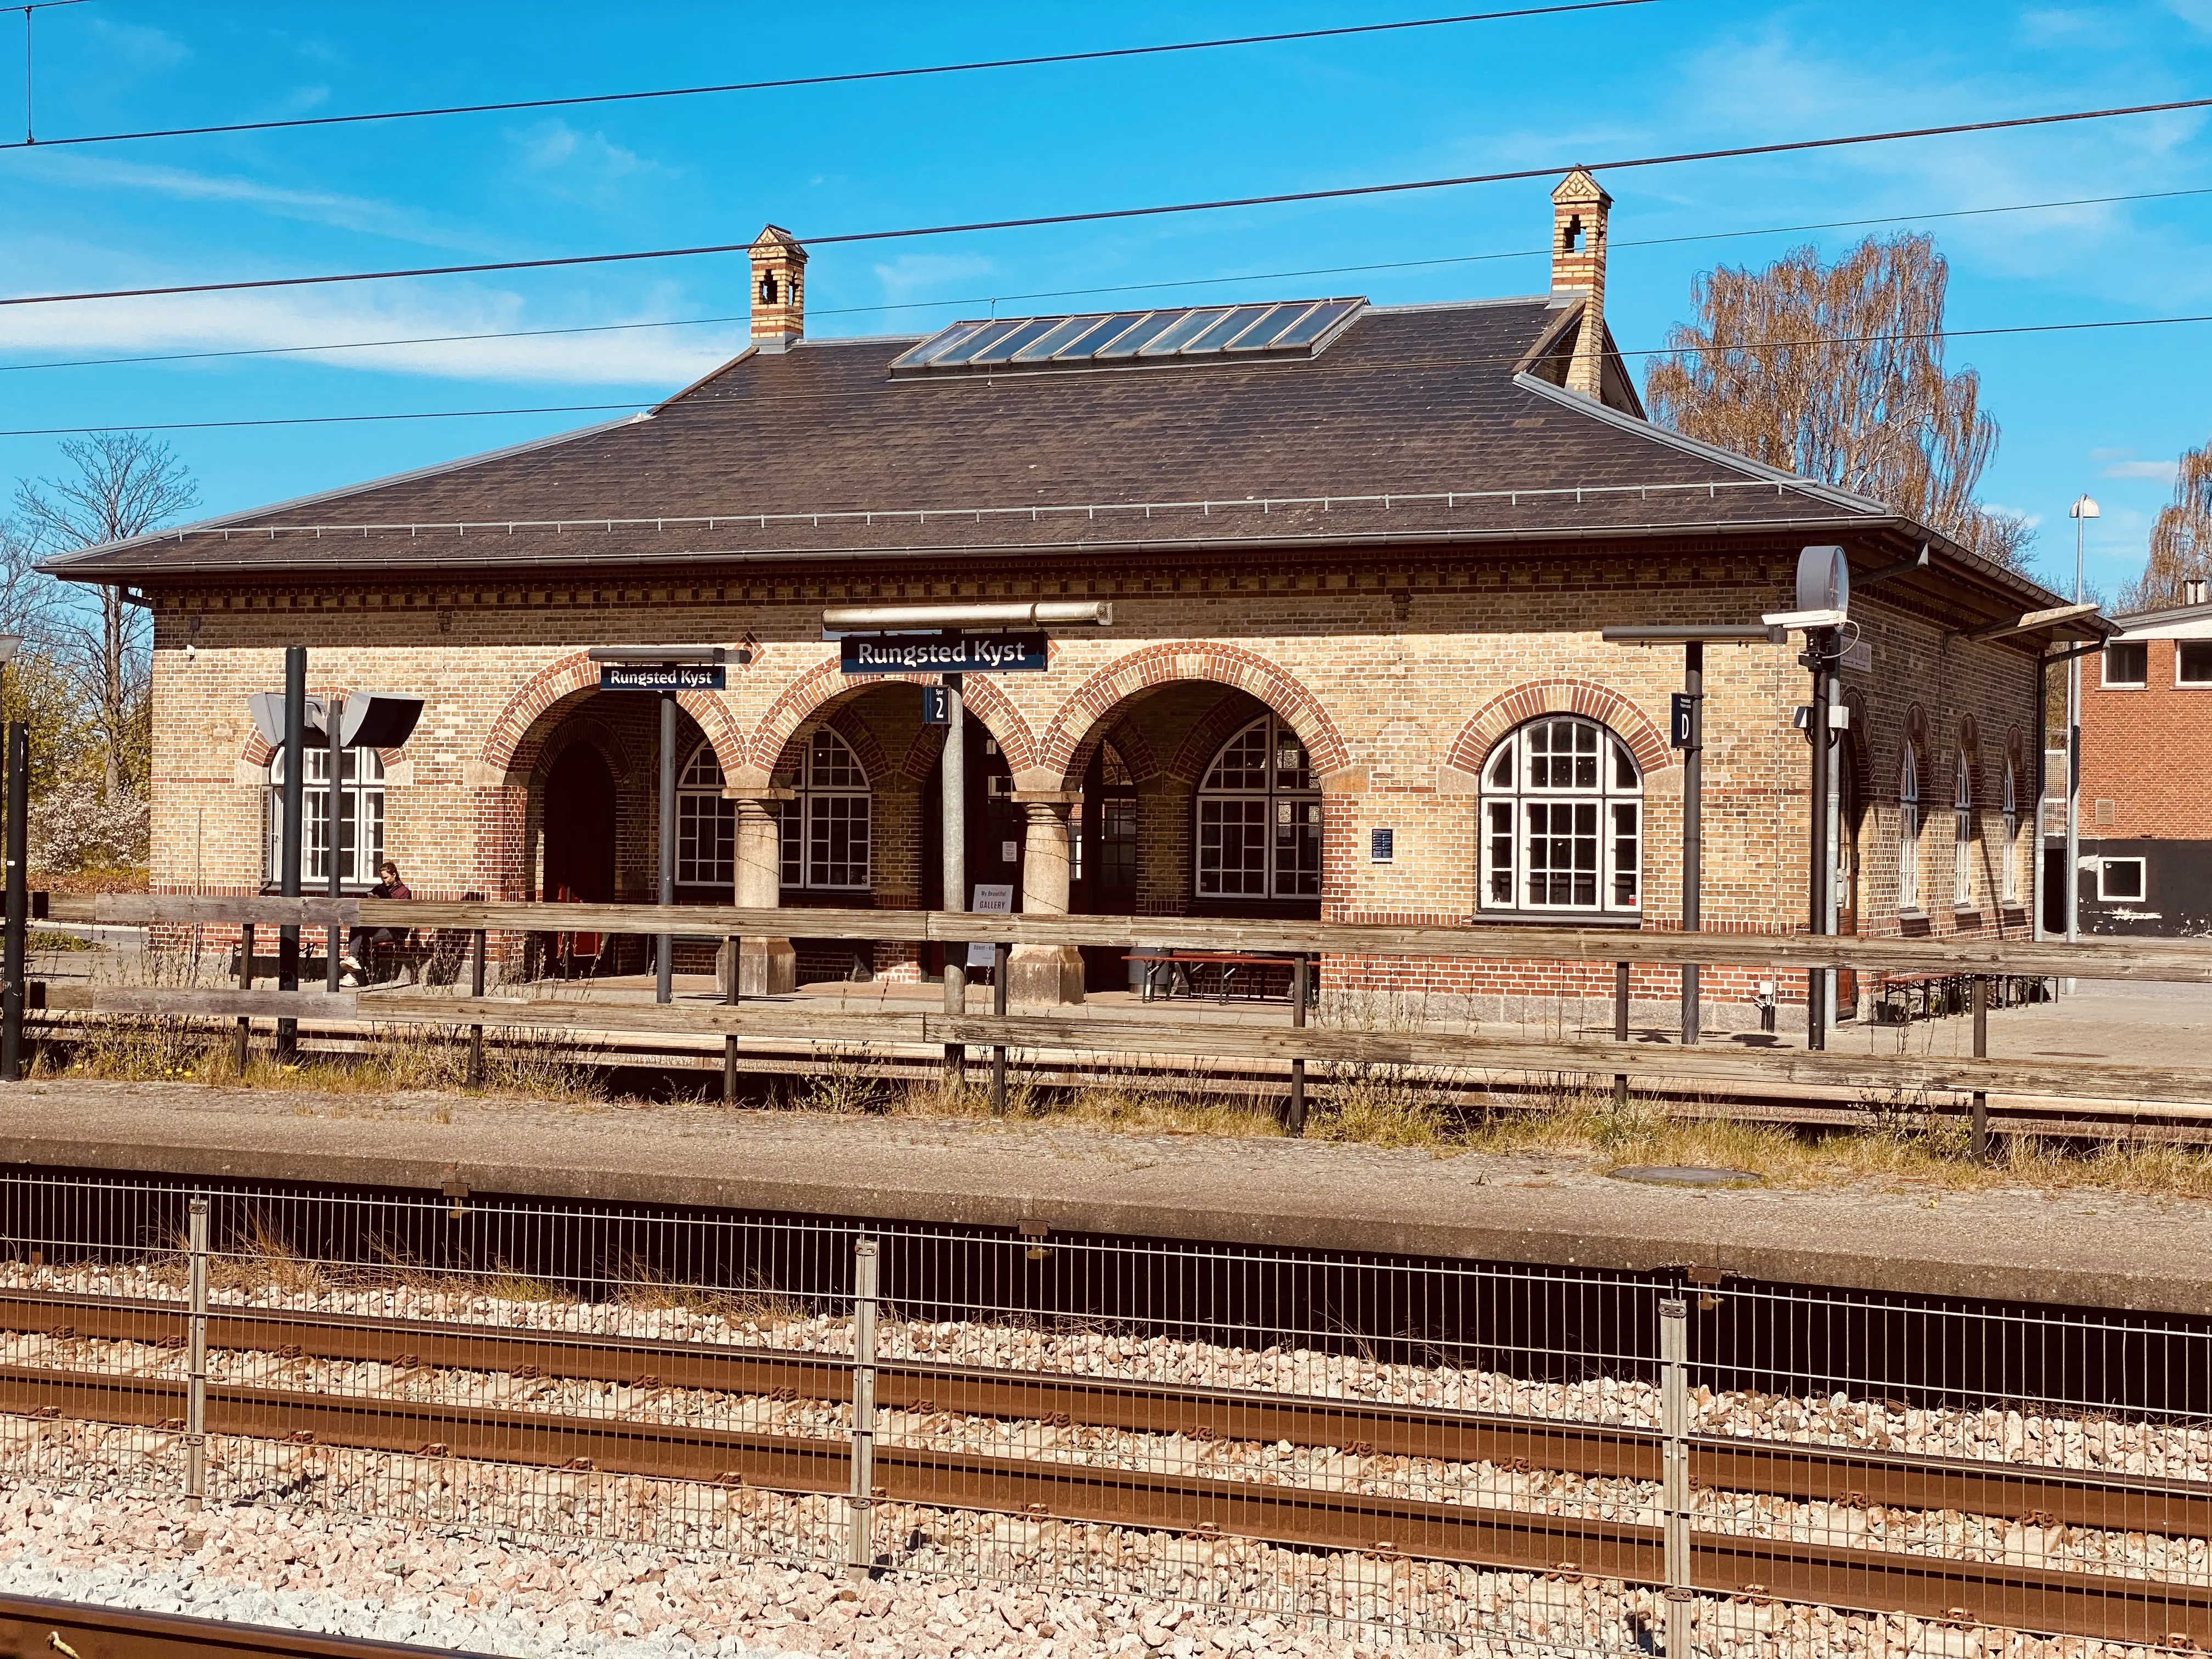 Rungsted Kyst Station.